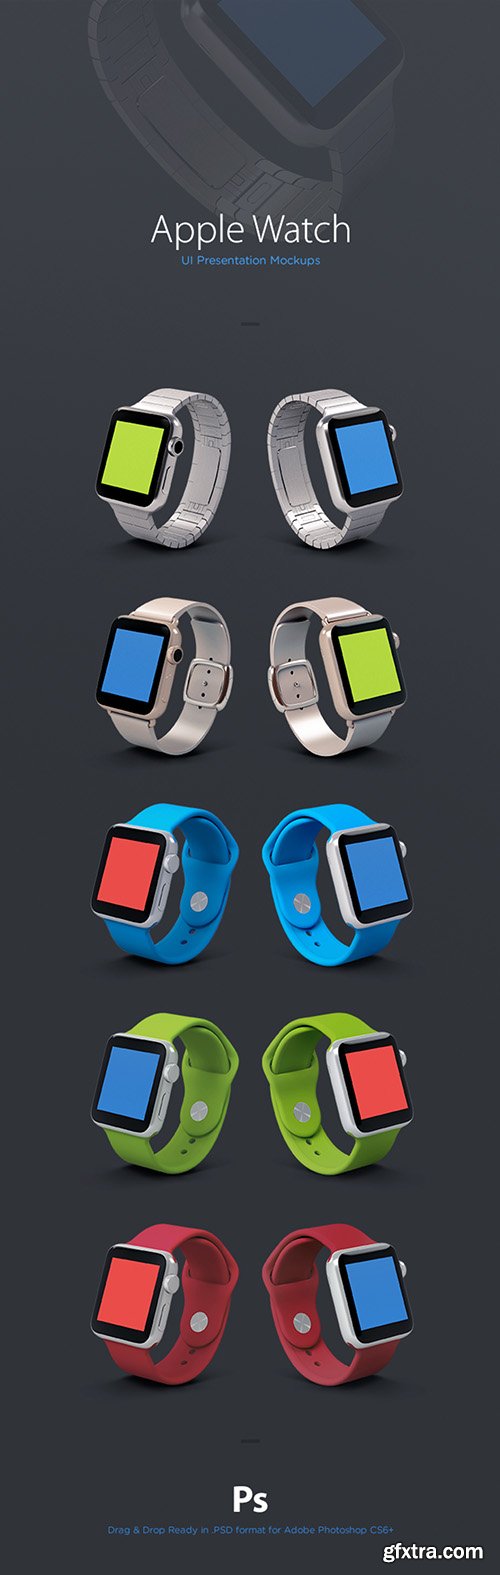 PSD Mock-Up - Apple Watch - Colored iWatch